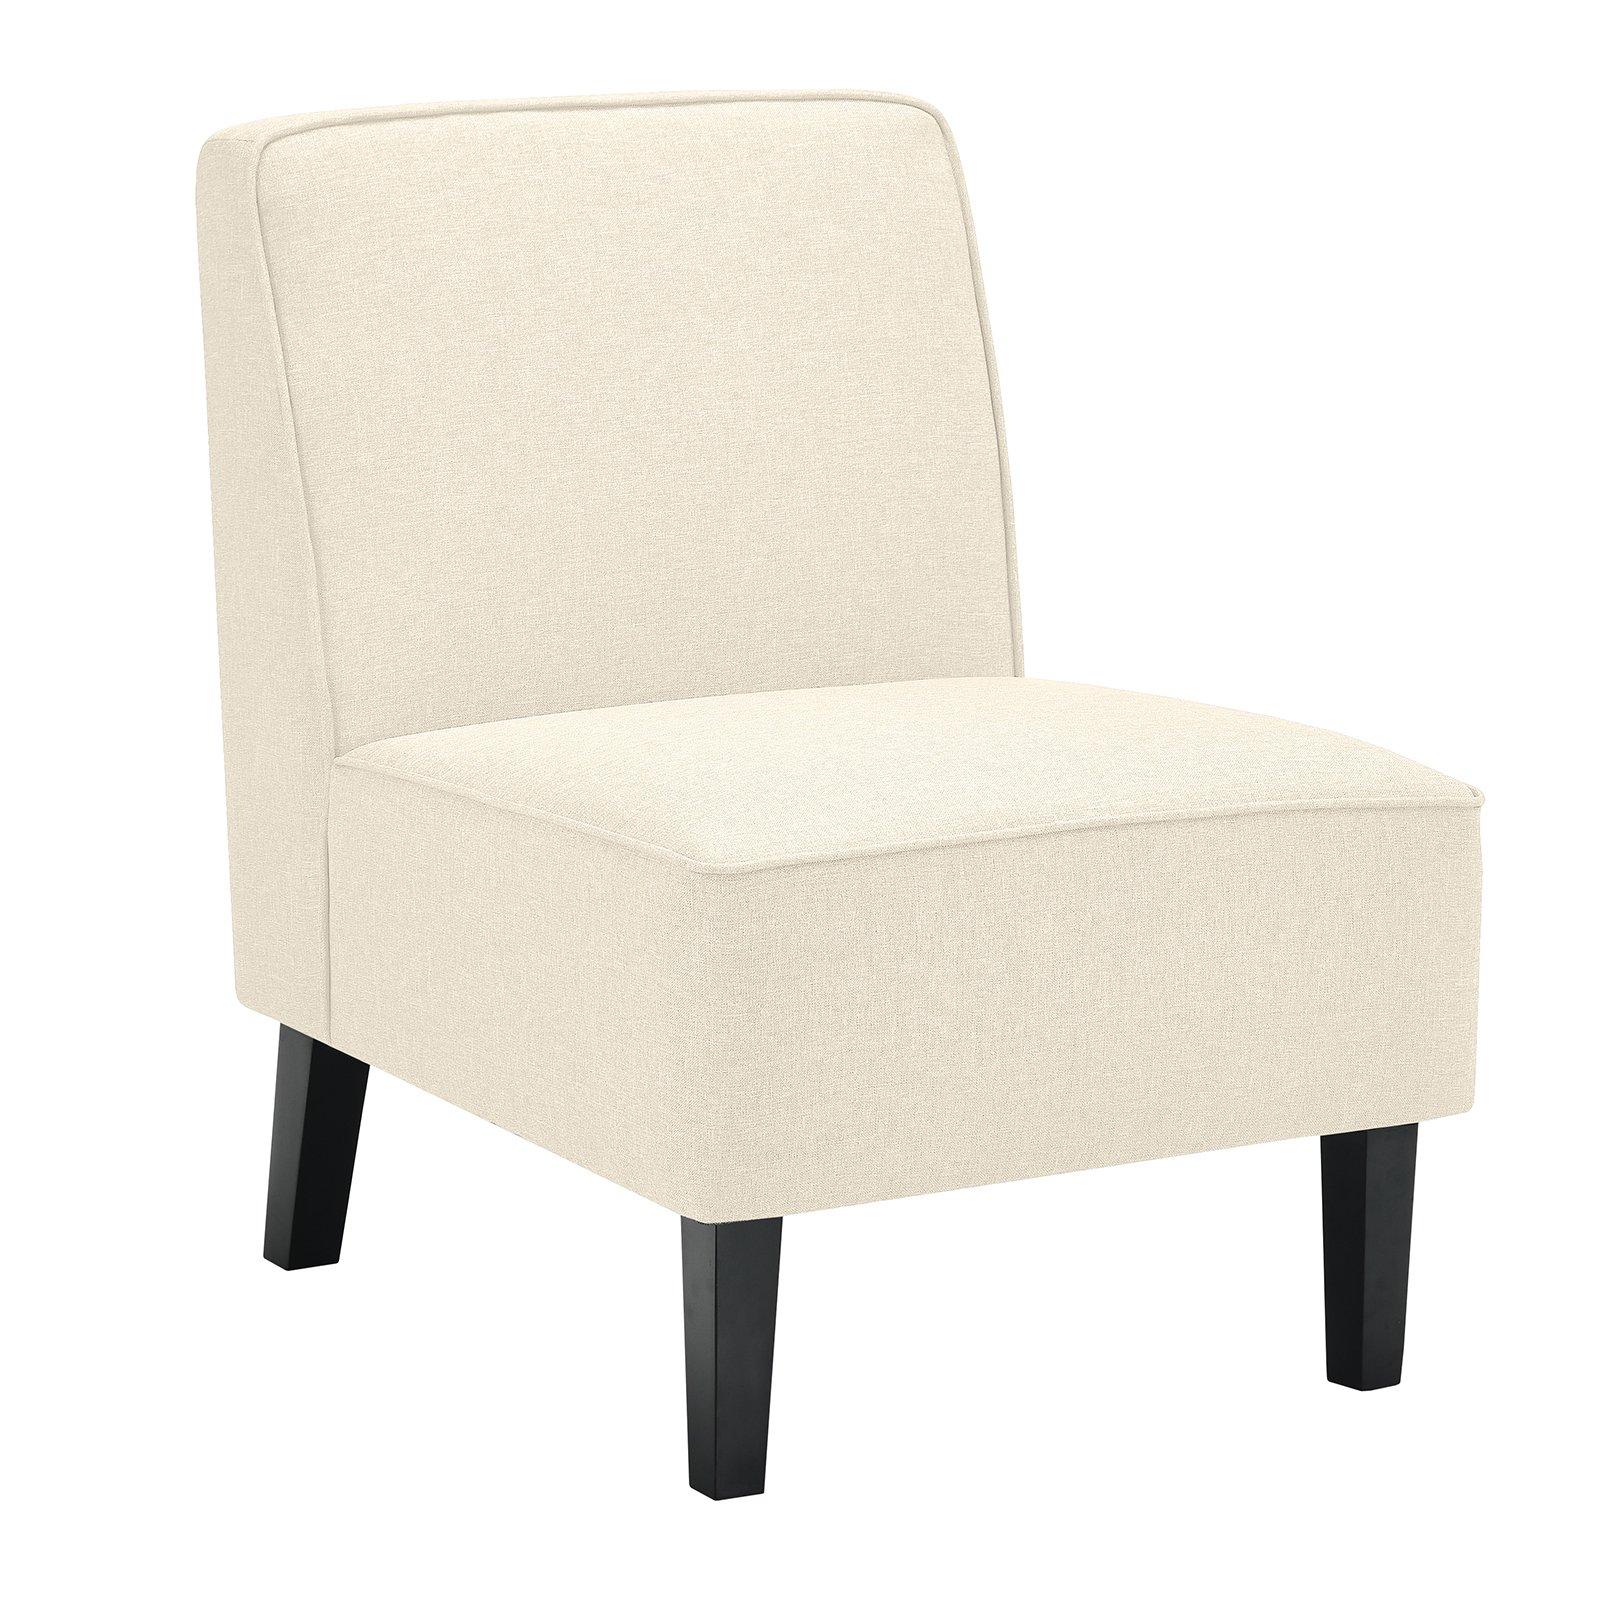 Upholstered Leisure Chair Accent Chair Linen Fabric Single Sofa Armless Chair